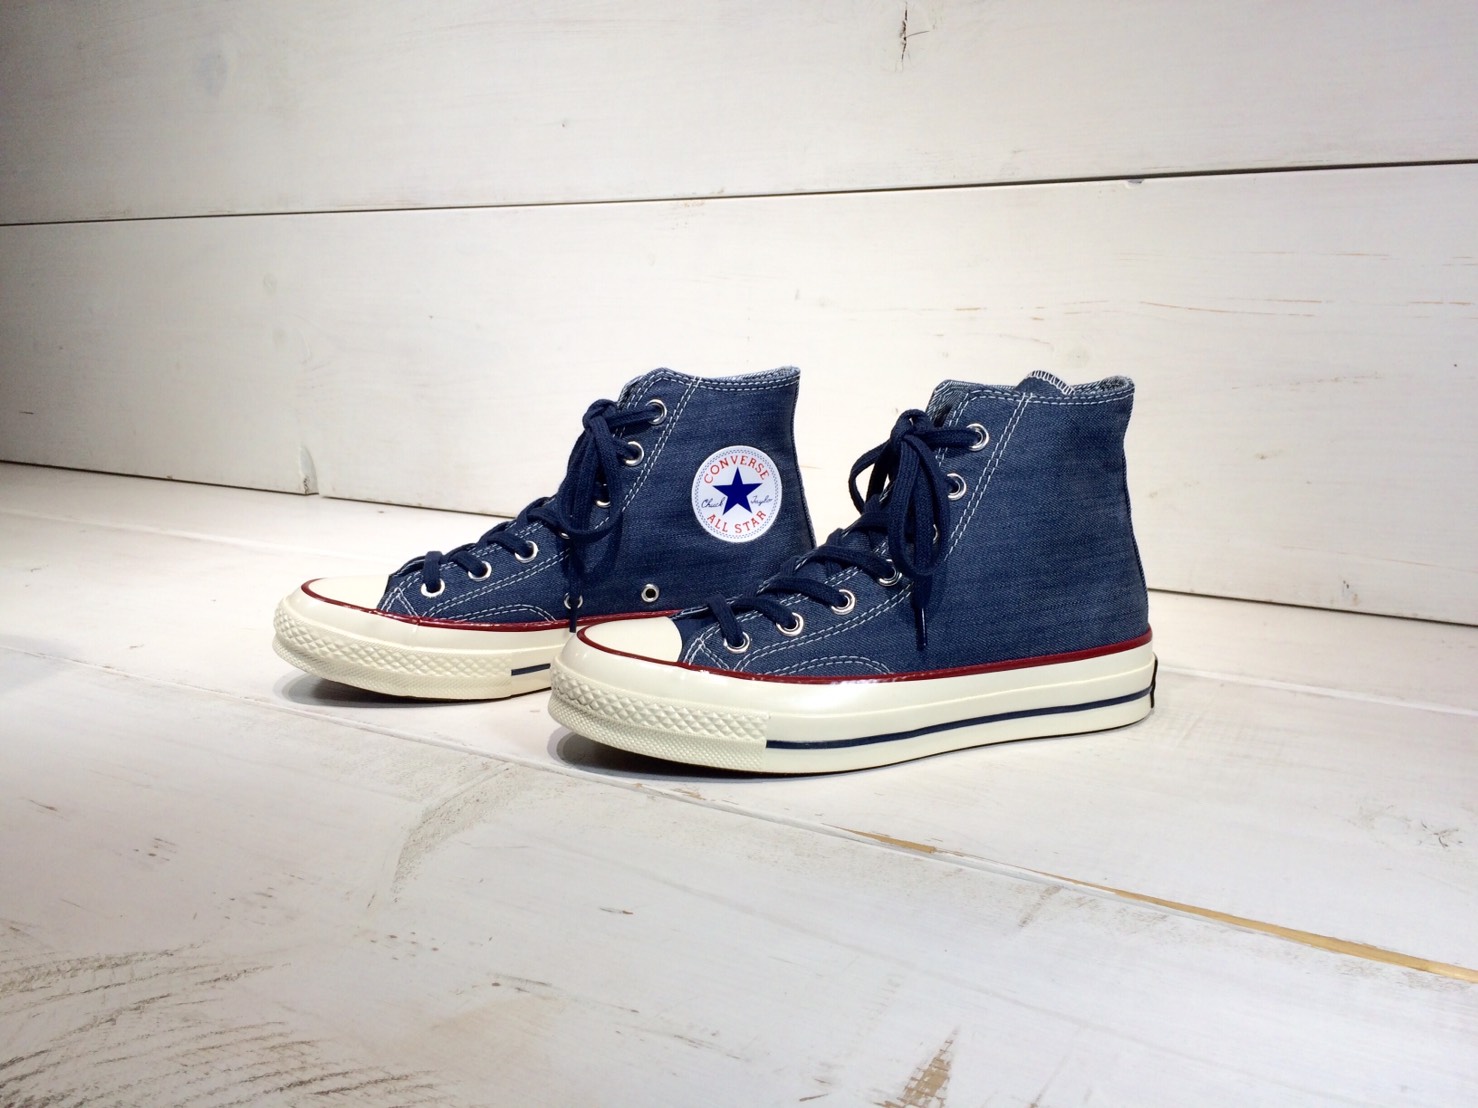 PROCEED Sneakers & Supplies: CONVERSE Chuck Taylor All Star '70 Denim